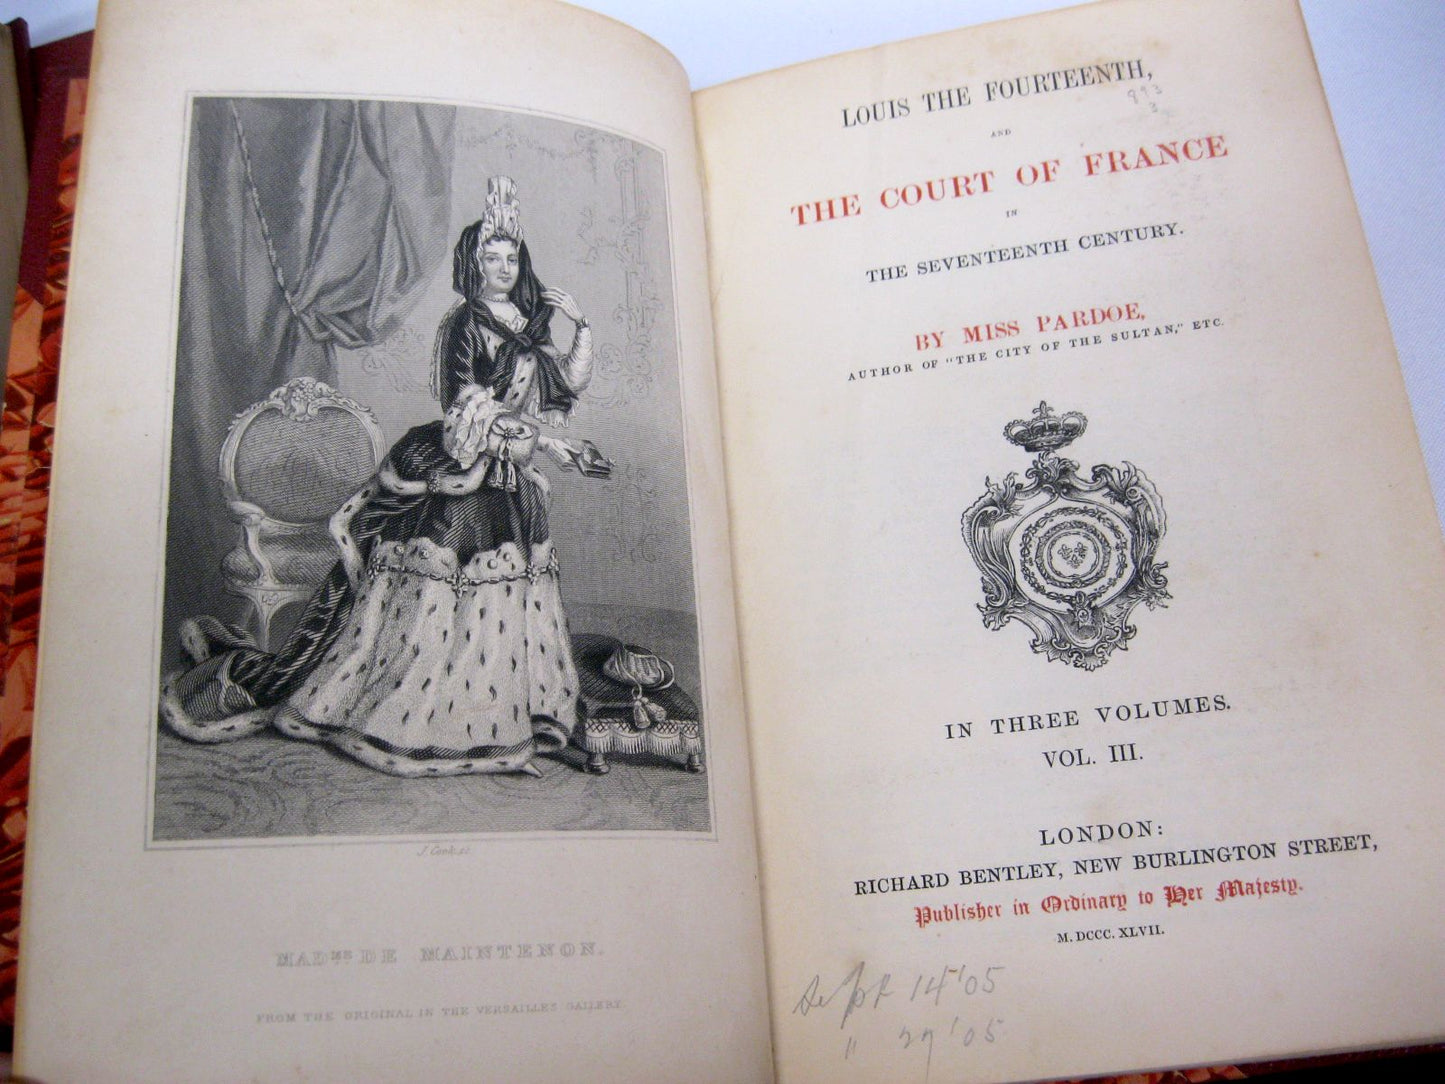 Louis XIV The Court of France in the 17th Century by Miss Pardoe